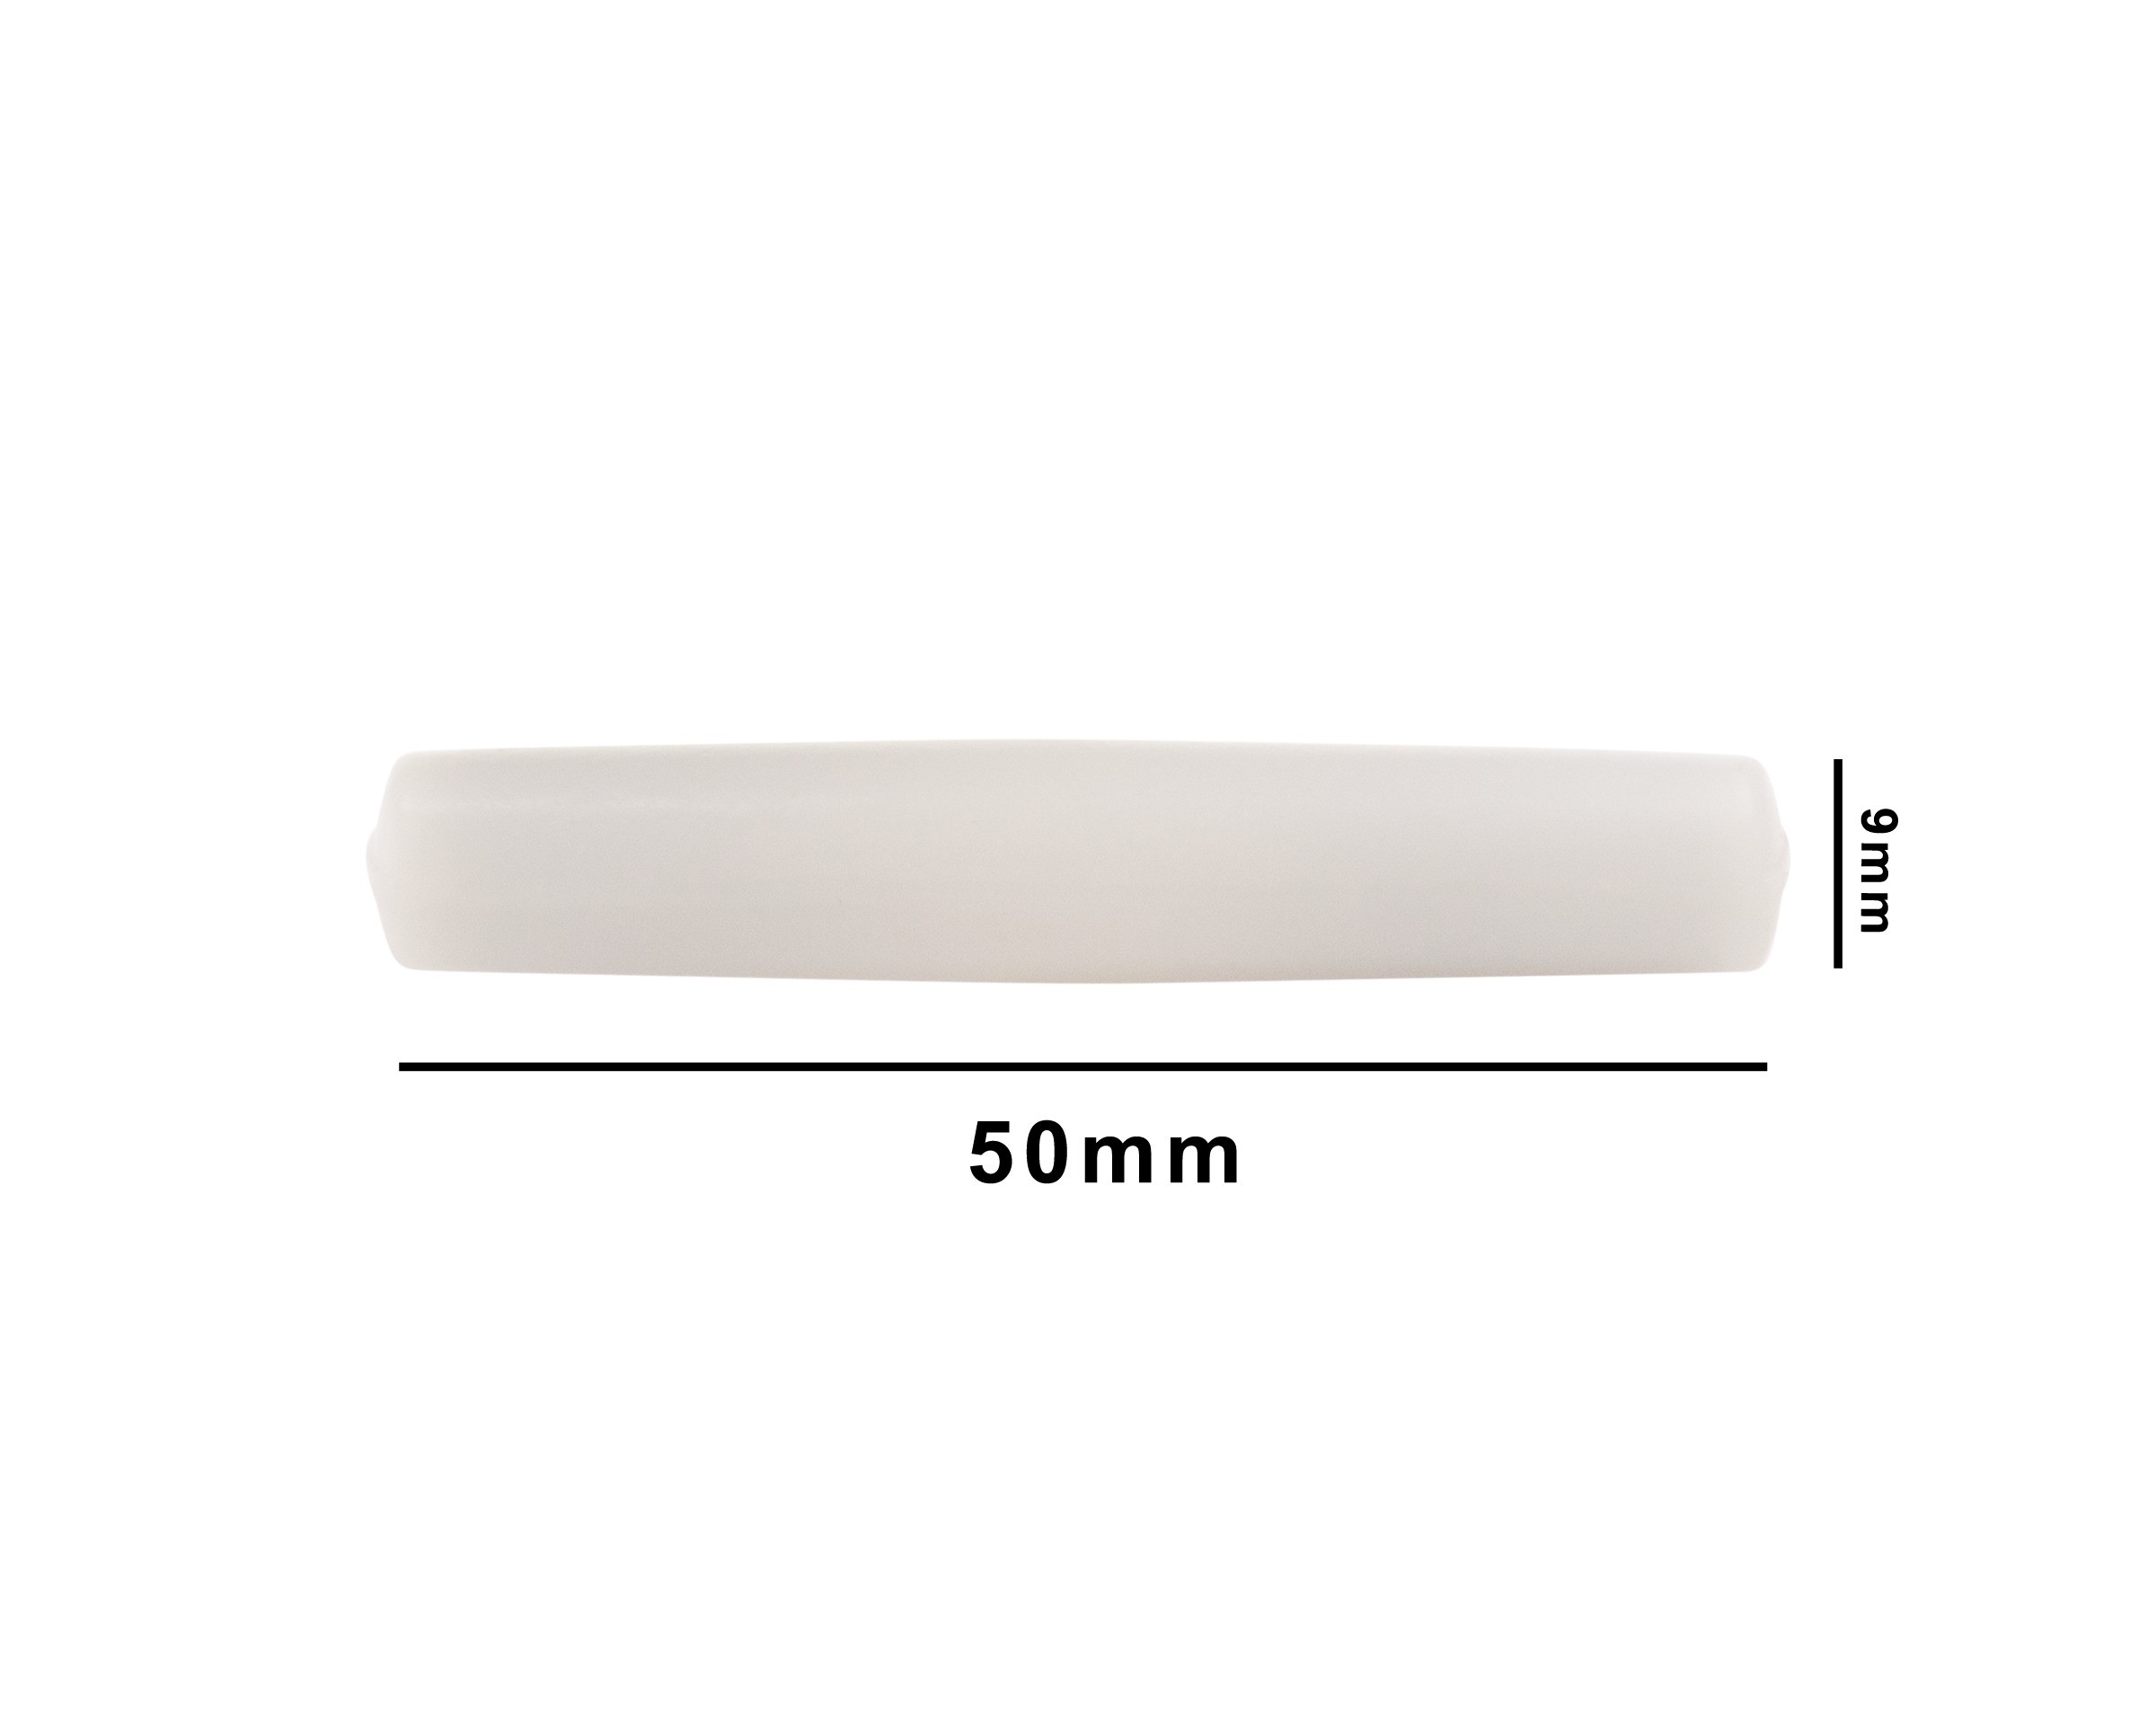 SP Bel-Art Spinbar Teflon Round with Tapered Ends Magnetic Stirring Bar; 50 x 9mm, White